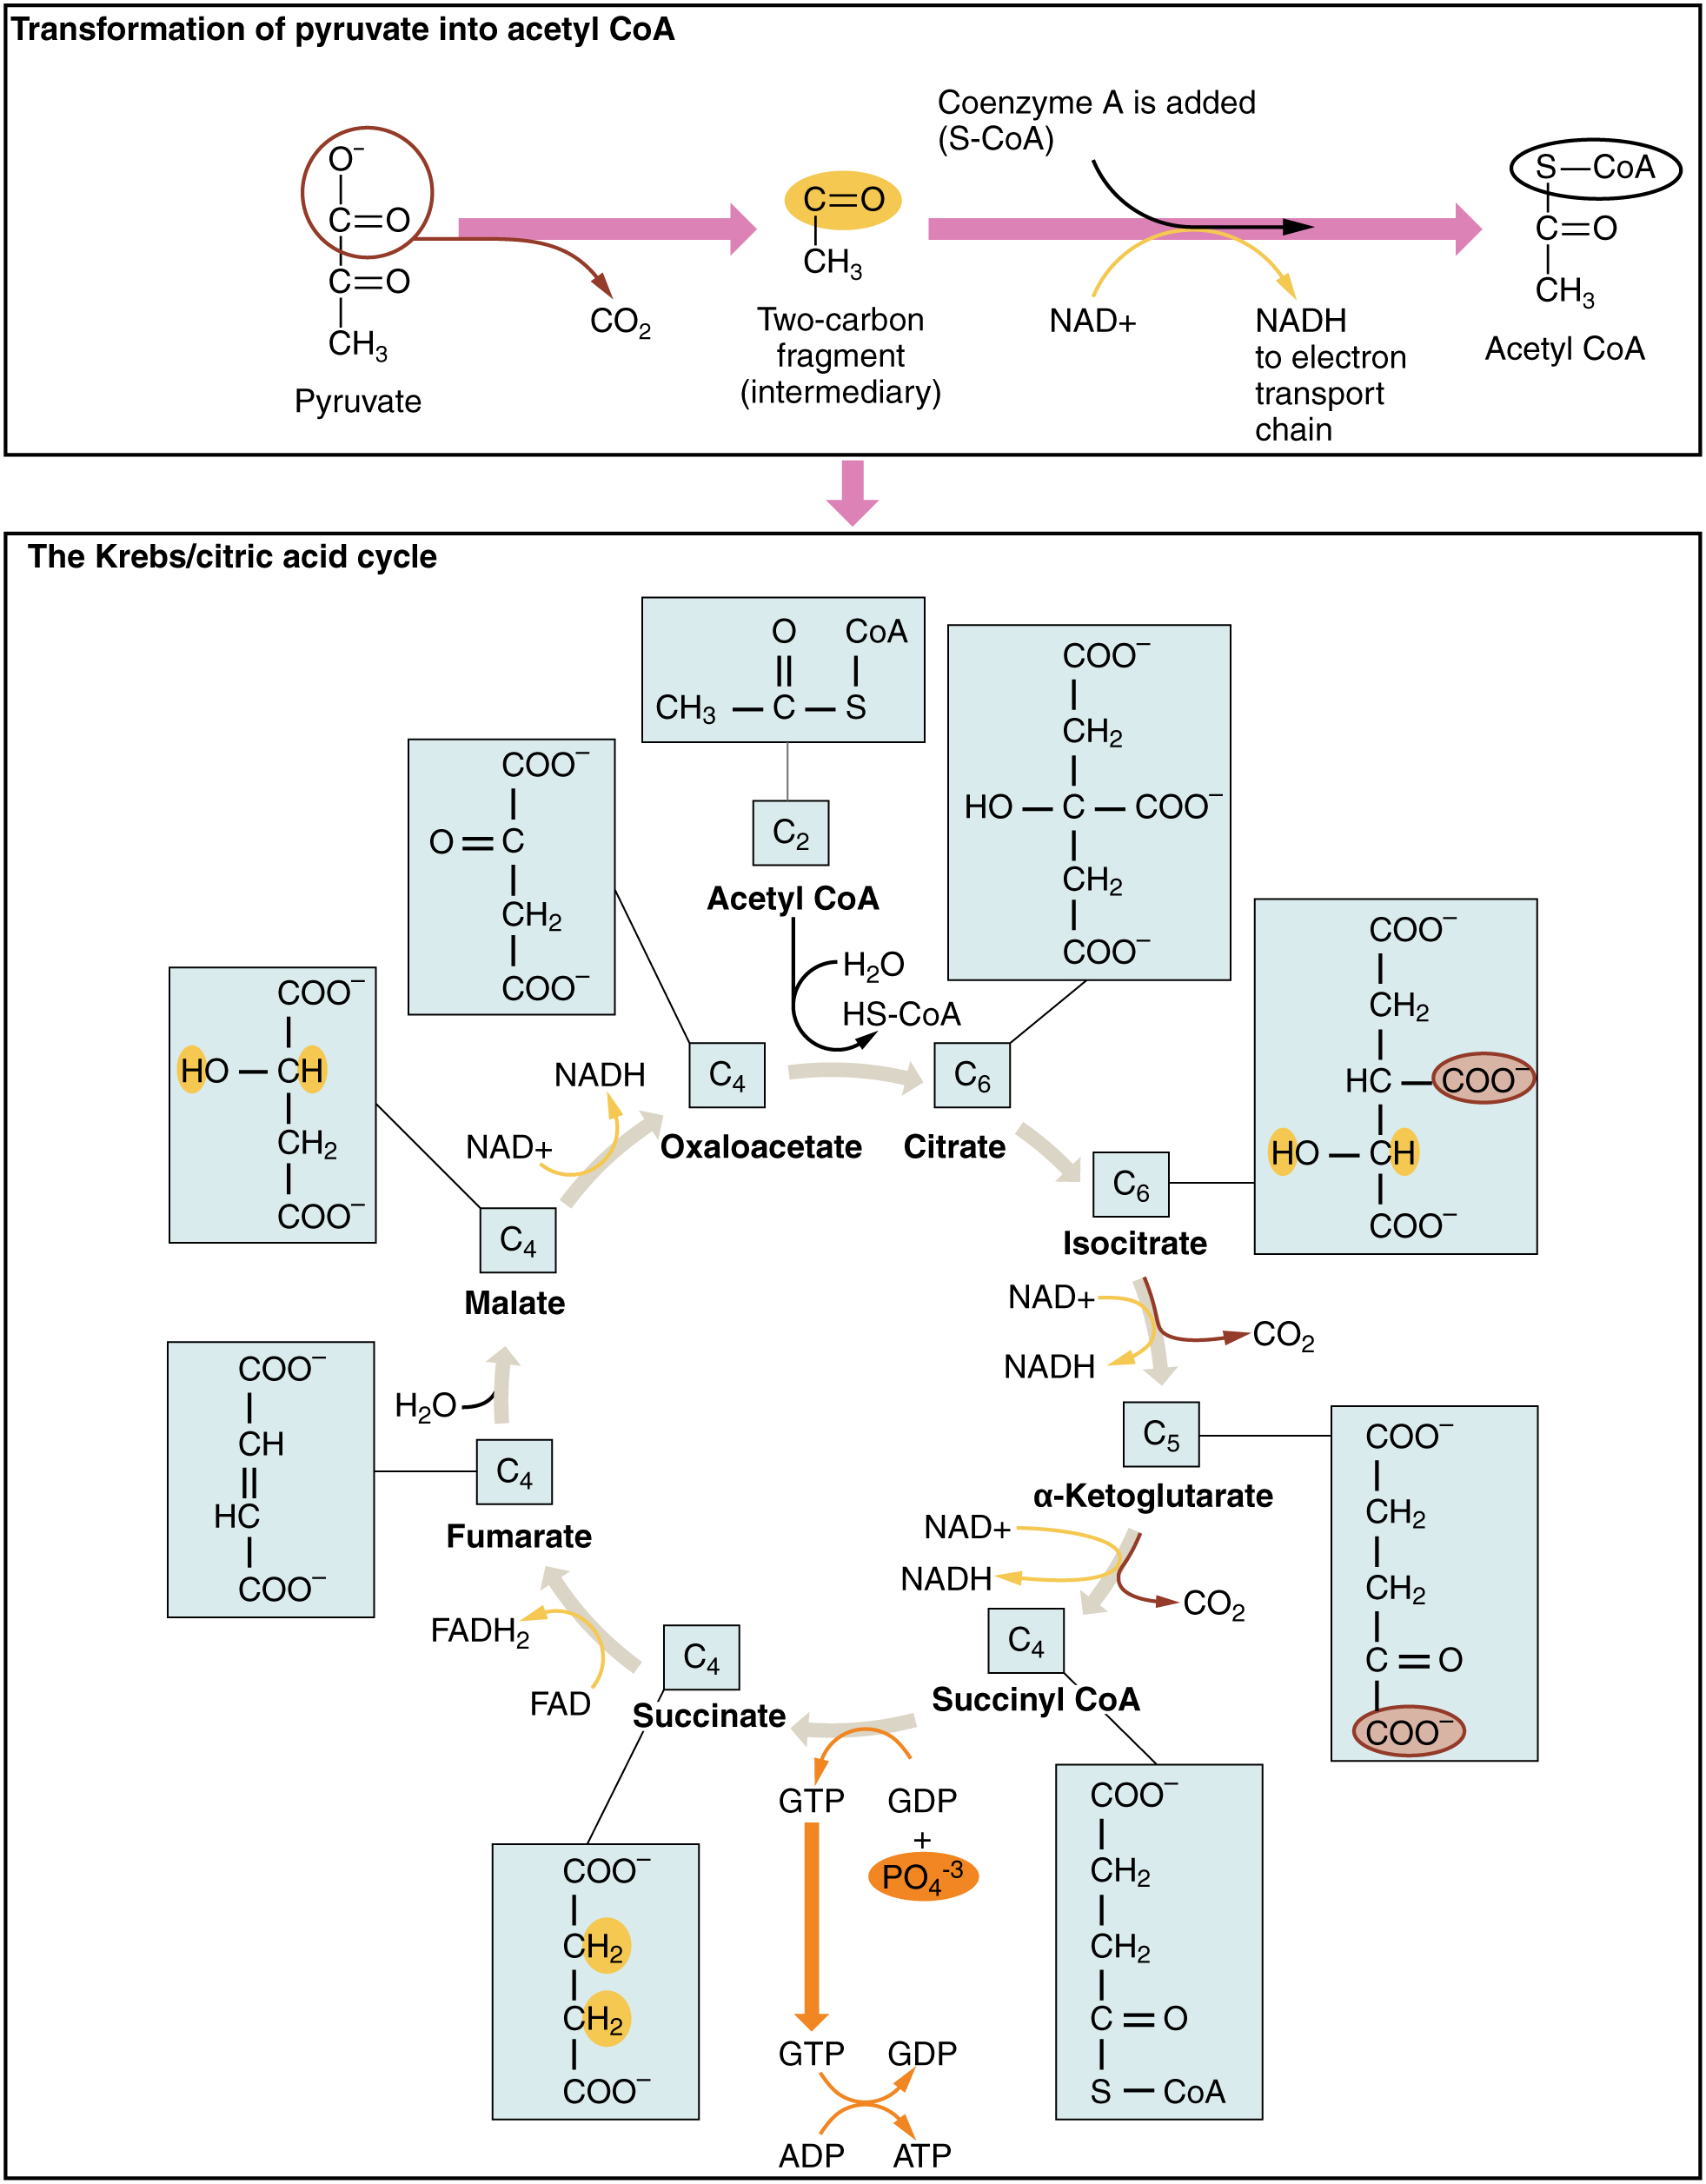 The top panel of this figure shows the transformation of pyruvate to acetyl-CoA, and the bottom panel shows the steps in Krebs cycle.